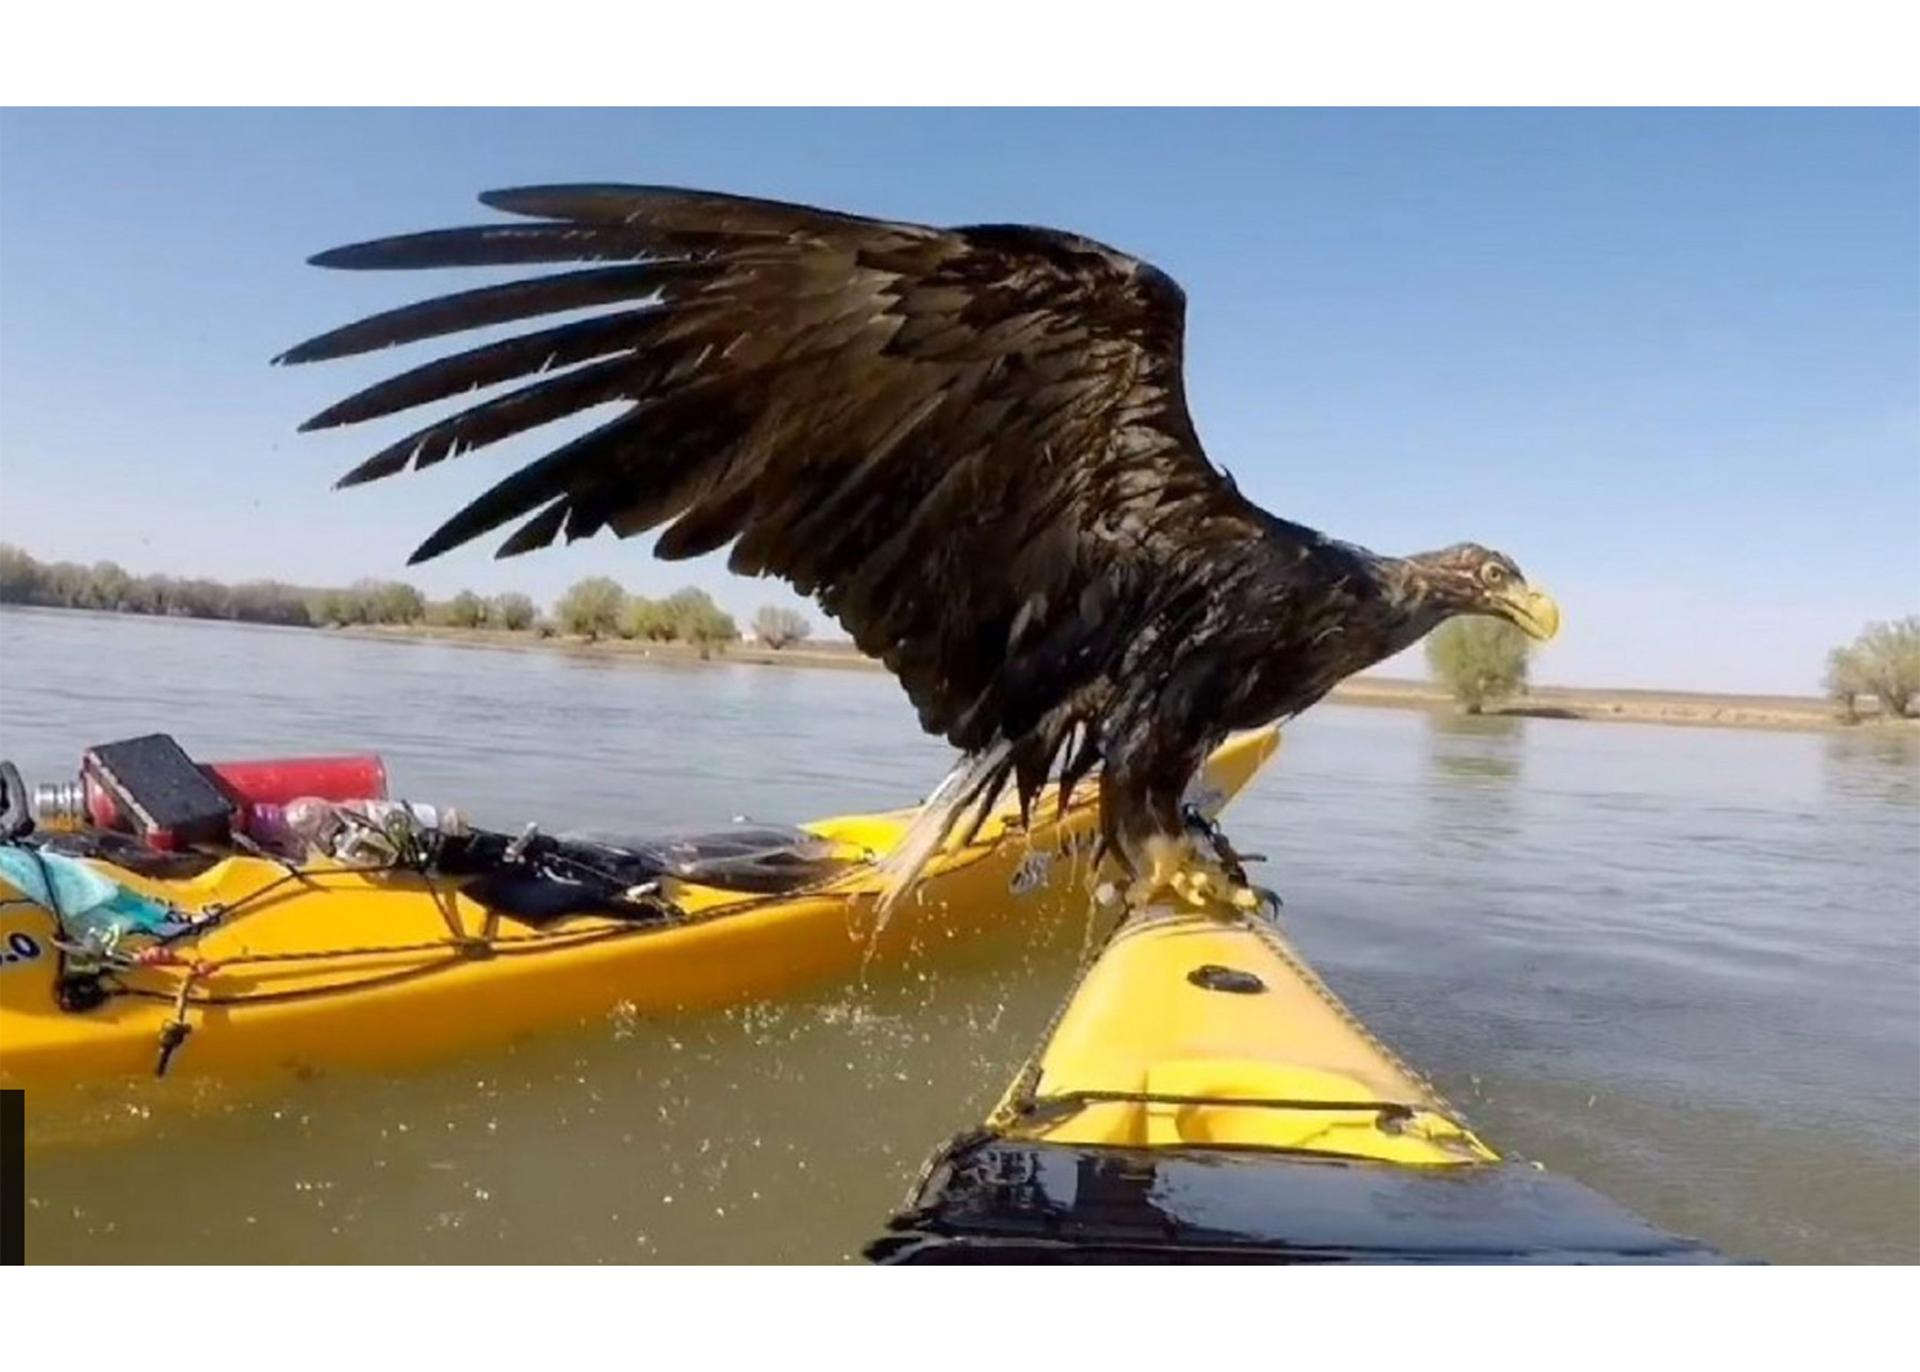 Eagle on part of a yellow boat in the water